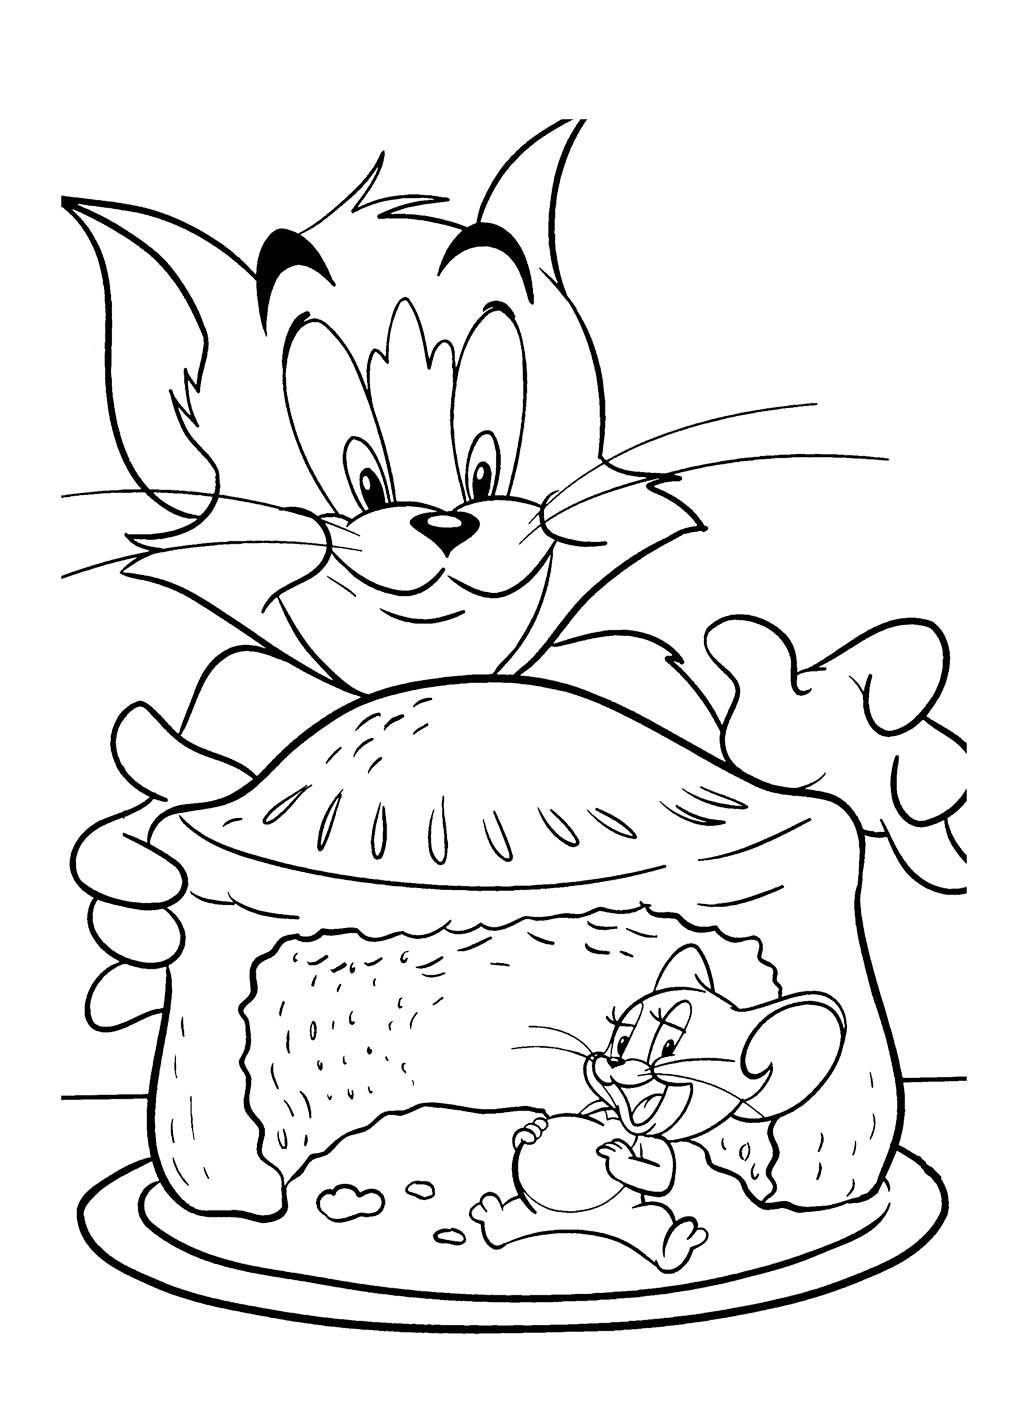 Tom Jerry Pencil Drawings Coloring Page 01 | Tom And Jerry Coloring - Free Printable Tom And Jerry Coloring Pages